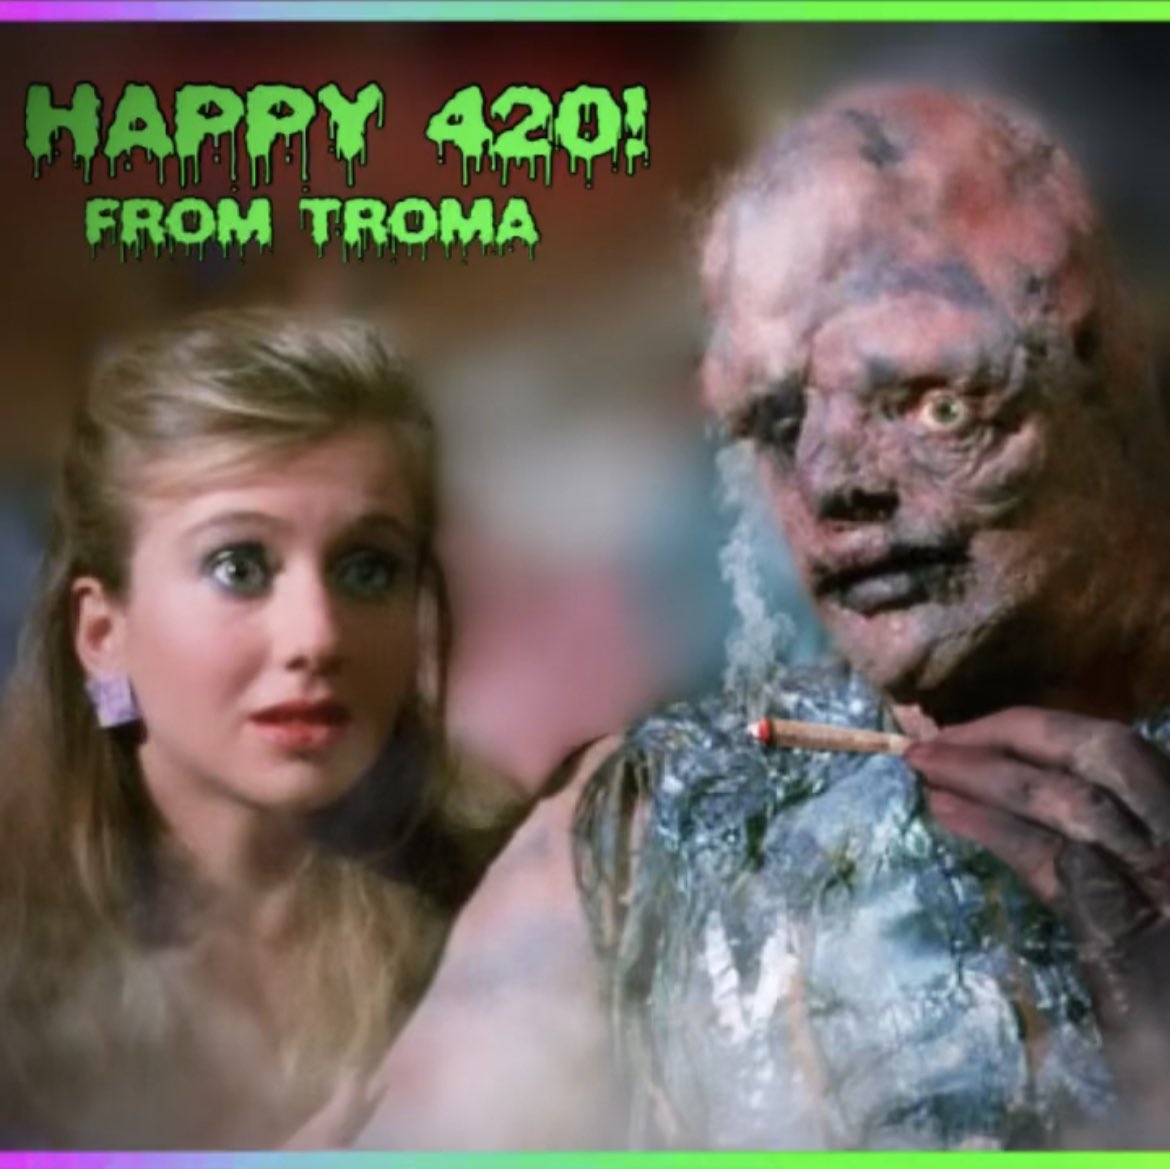 Hey Tox! You gonna pass that around or what? HAVE A TROMATASTIC 420! #thetoxicavenger #troma #420day #fun #vintagemovies #indiefilm #film #indie #horror #classichorror